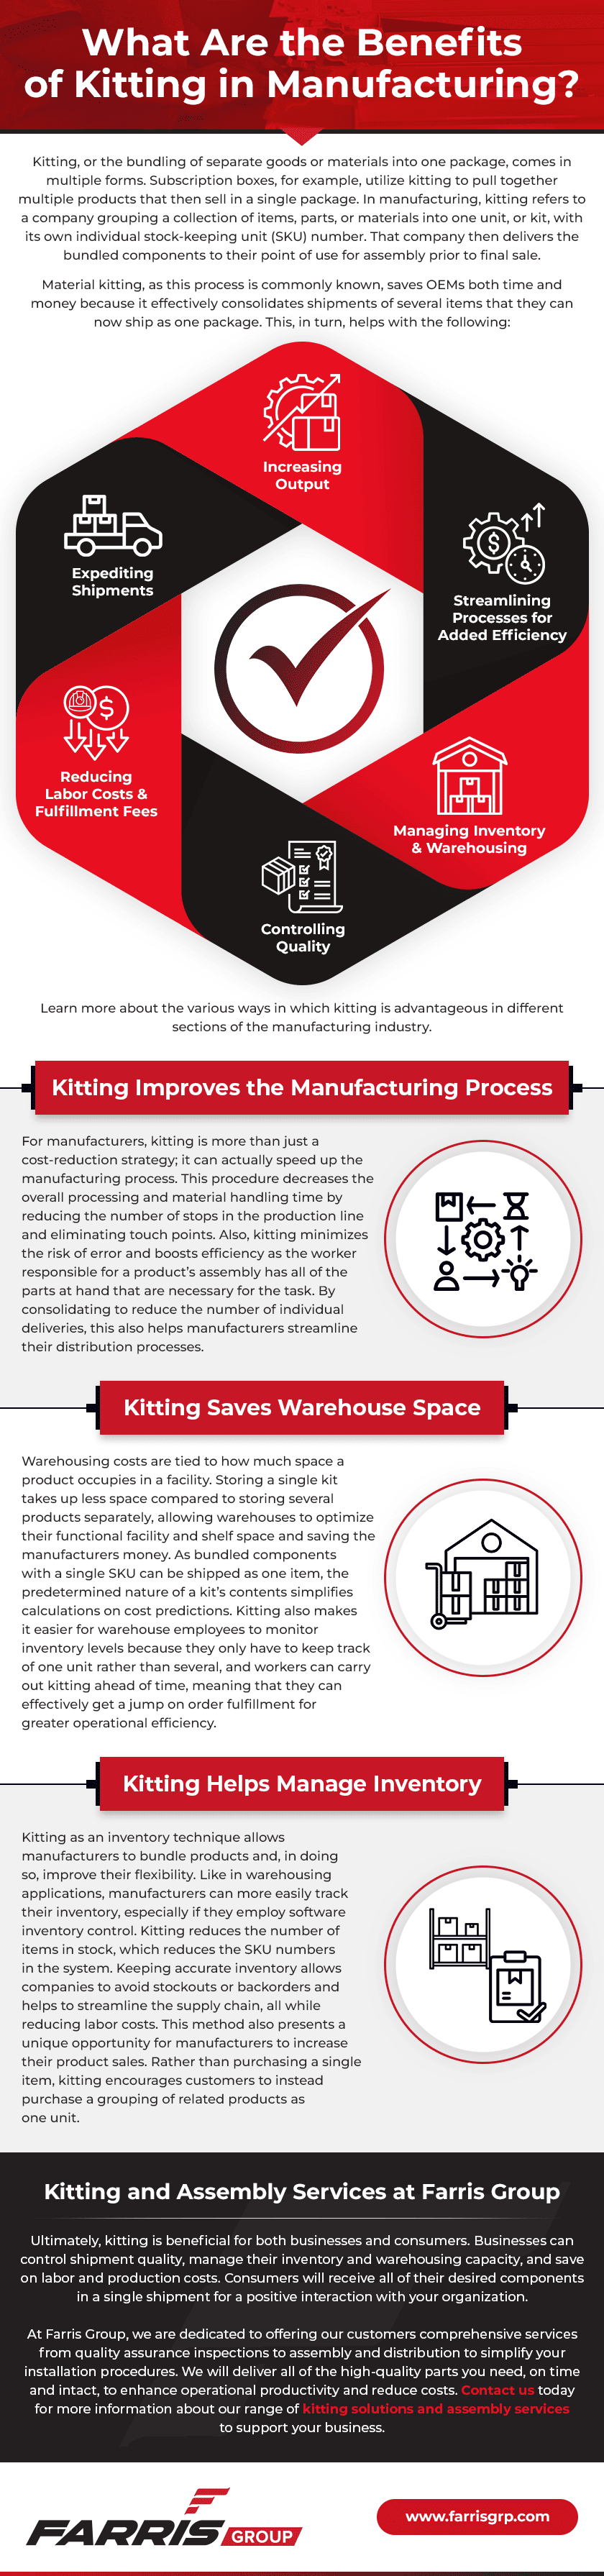 What-Are-the-Benefits-of-Kitting-in-Manufacturing